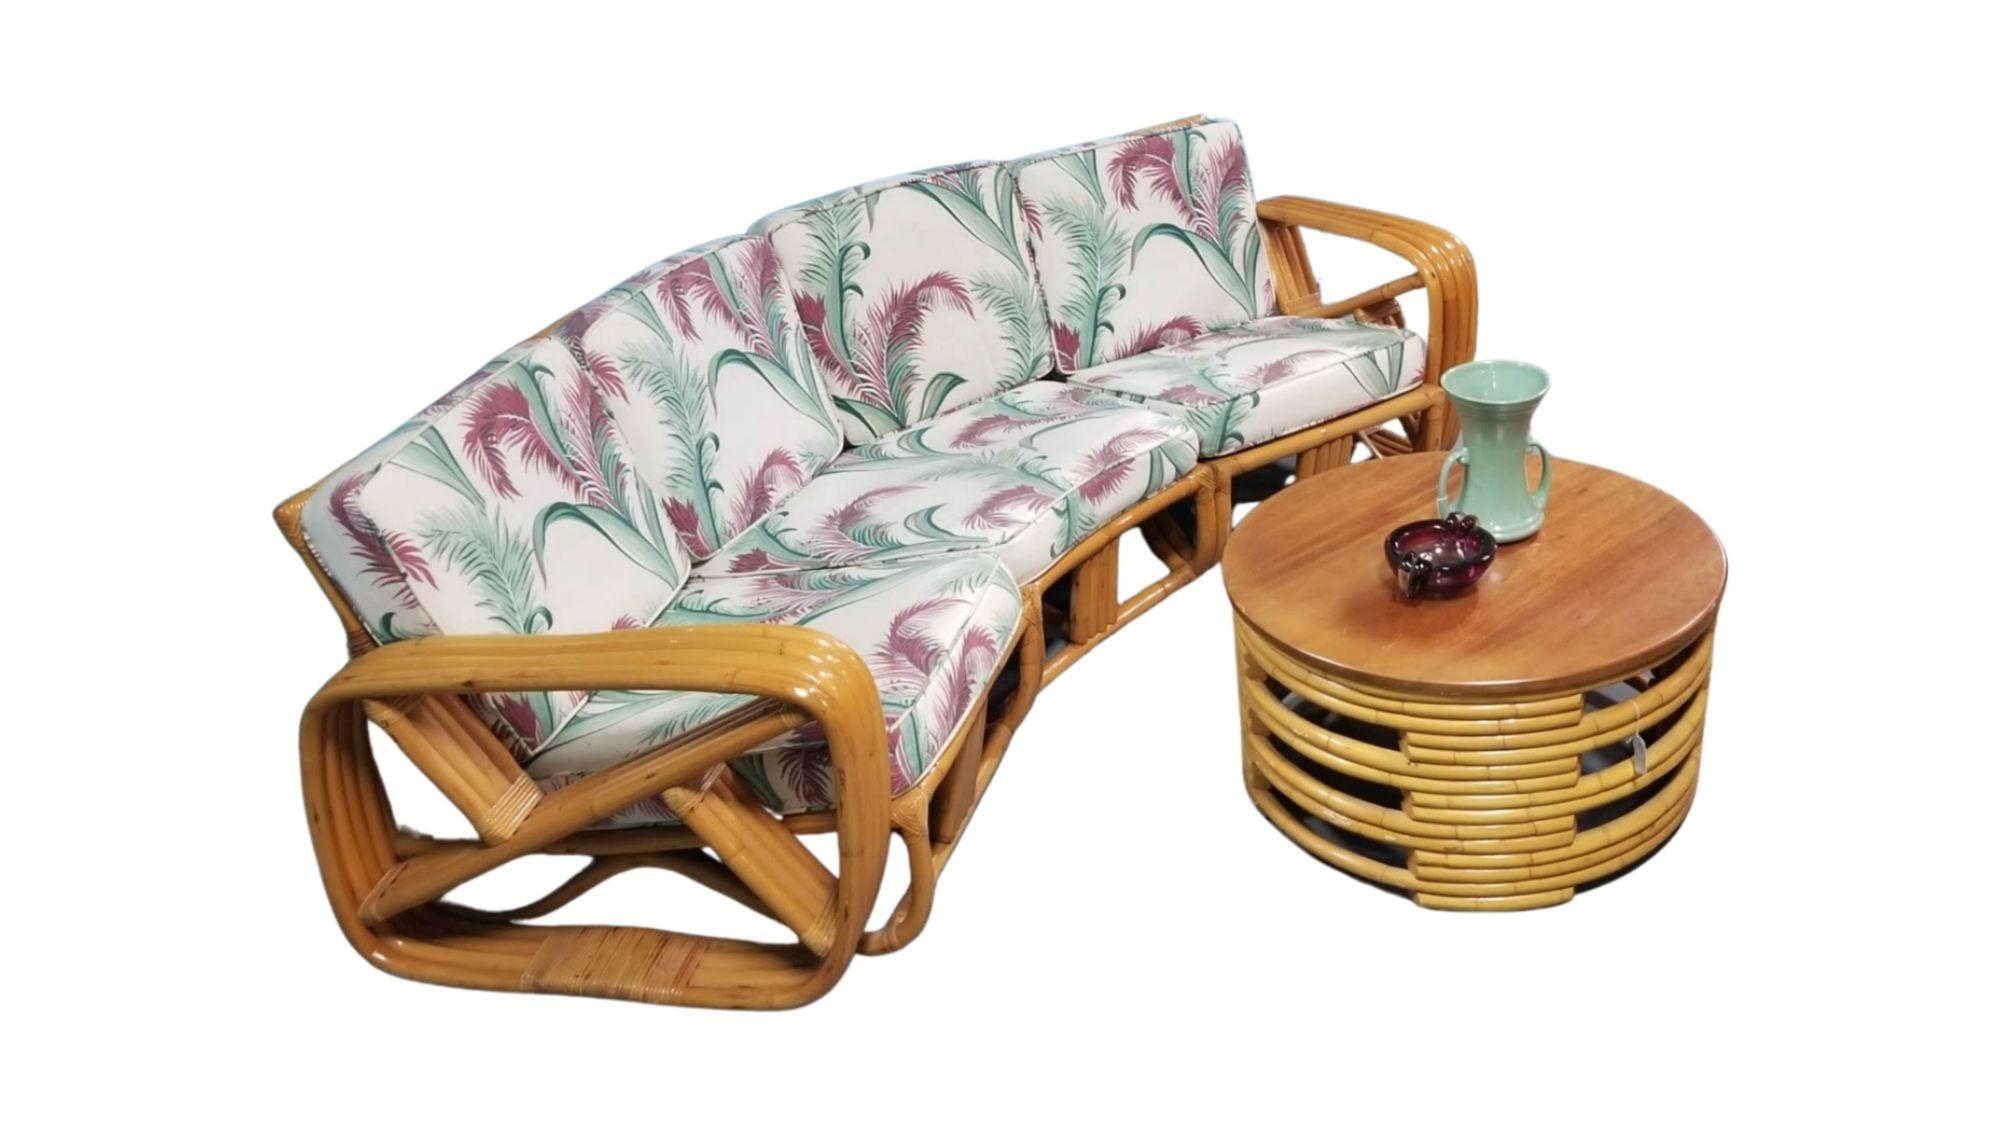 Mid-Century restored rattan living room set featuring a 3-piece sectional sofa with square pretzel arms, a round coffee table, and a two-tiered side table. Also included is an original 1950s murano ashtray and blue art pottery vase.

Circa